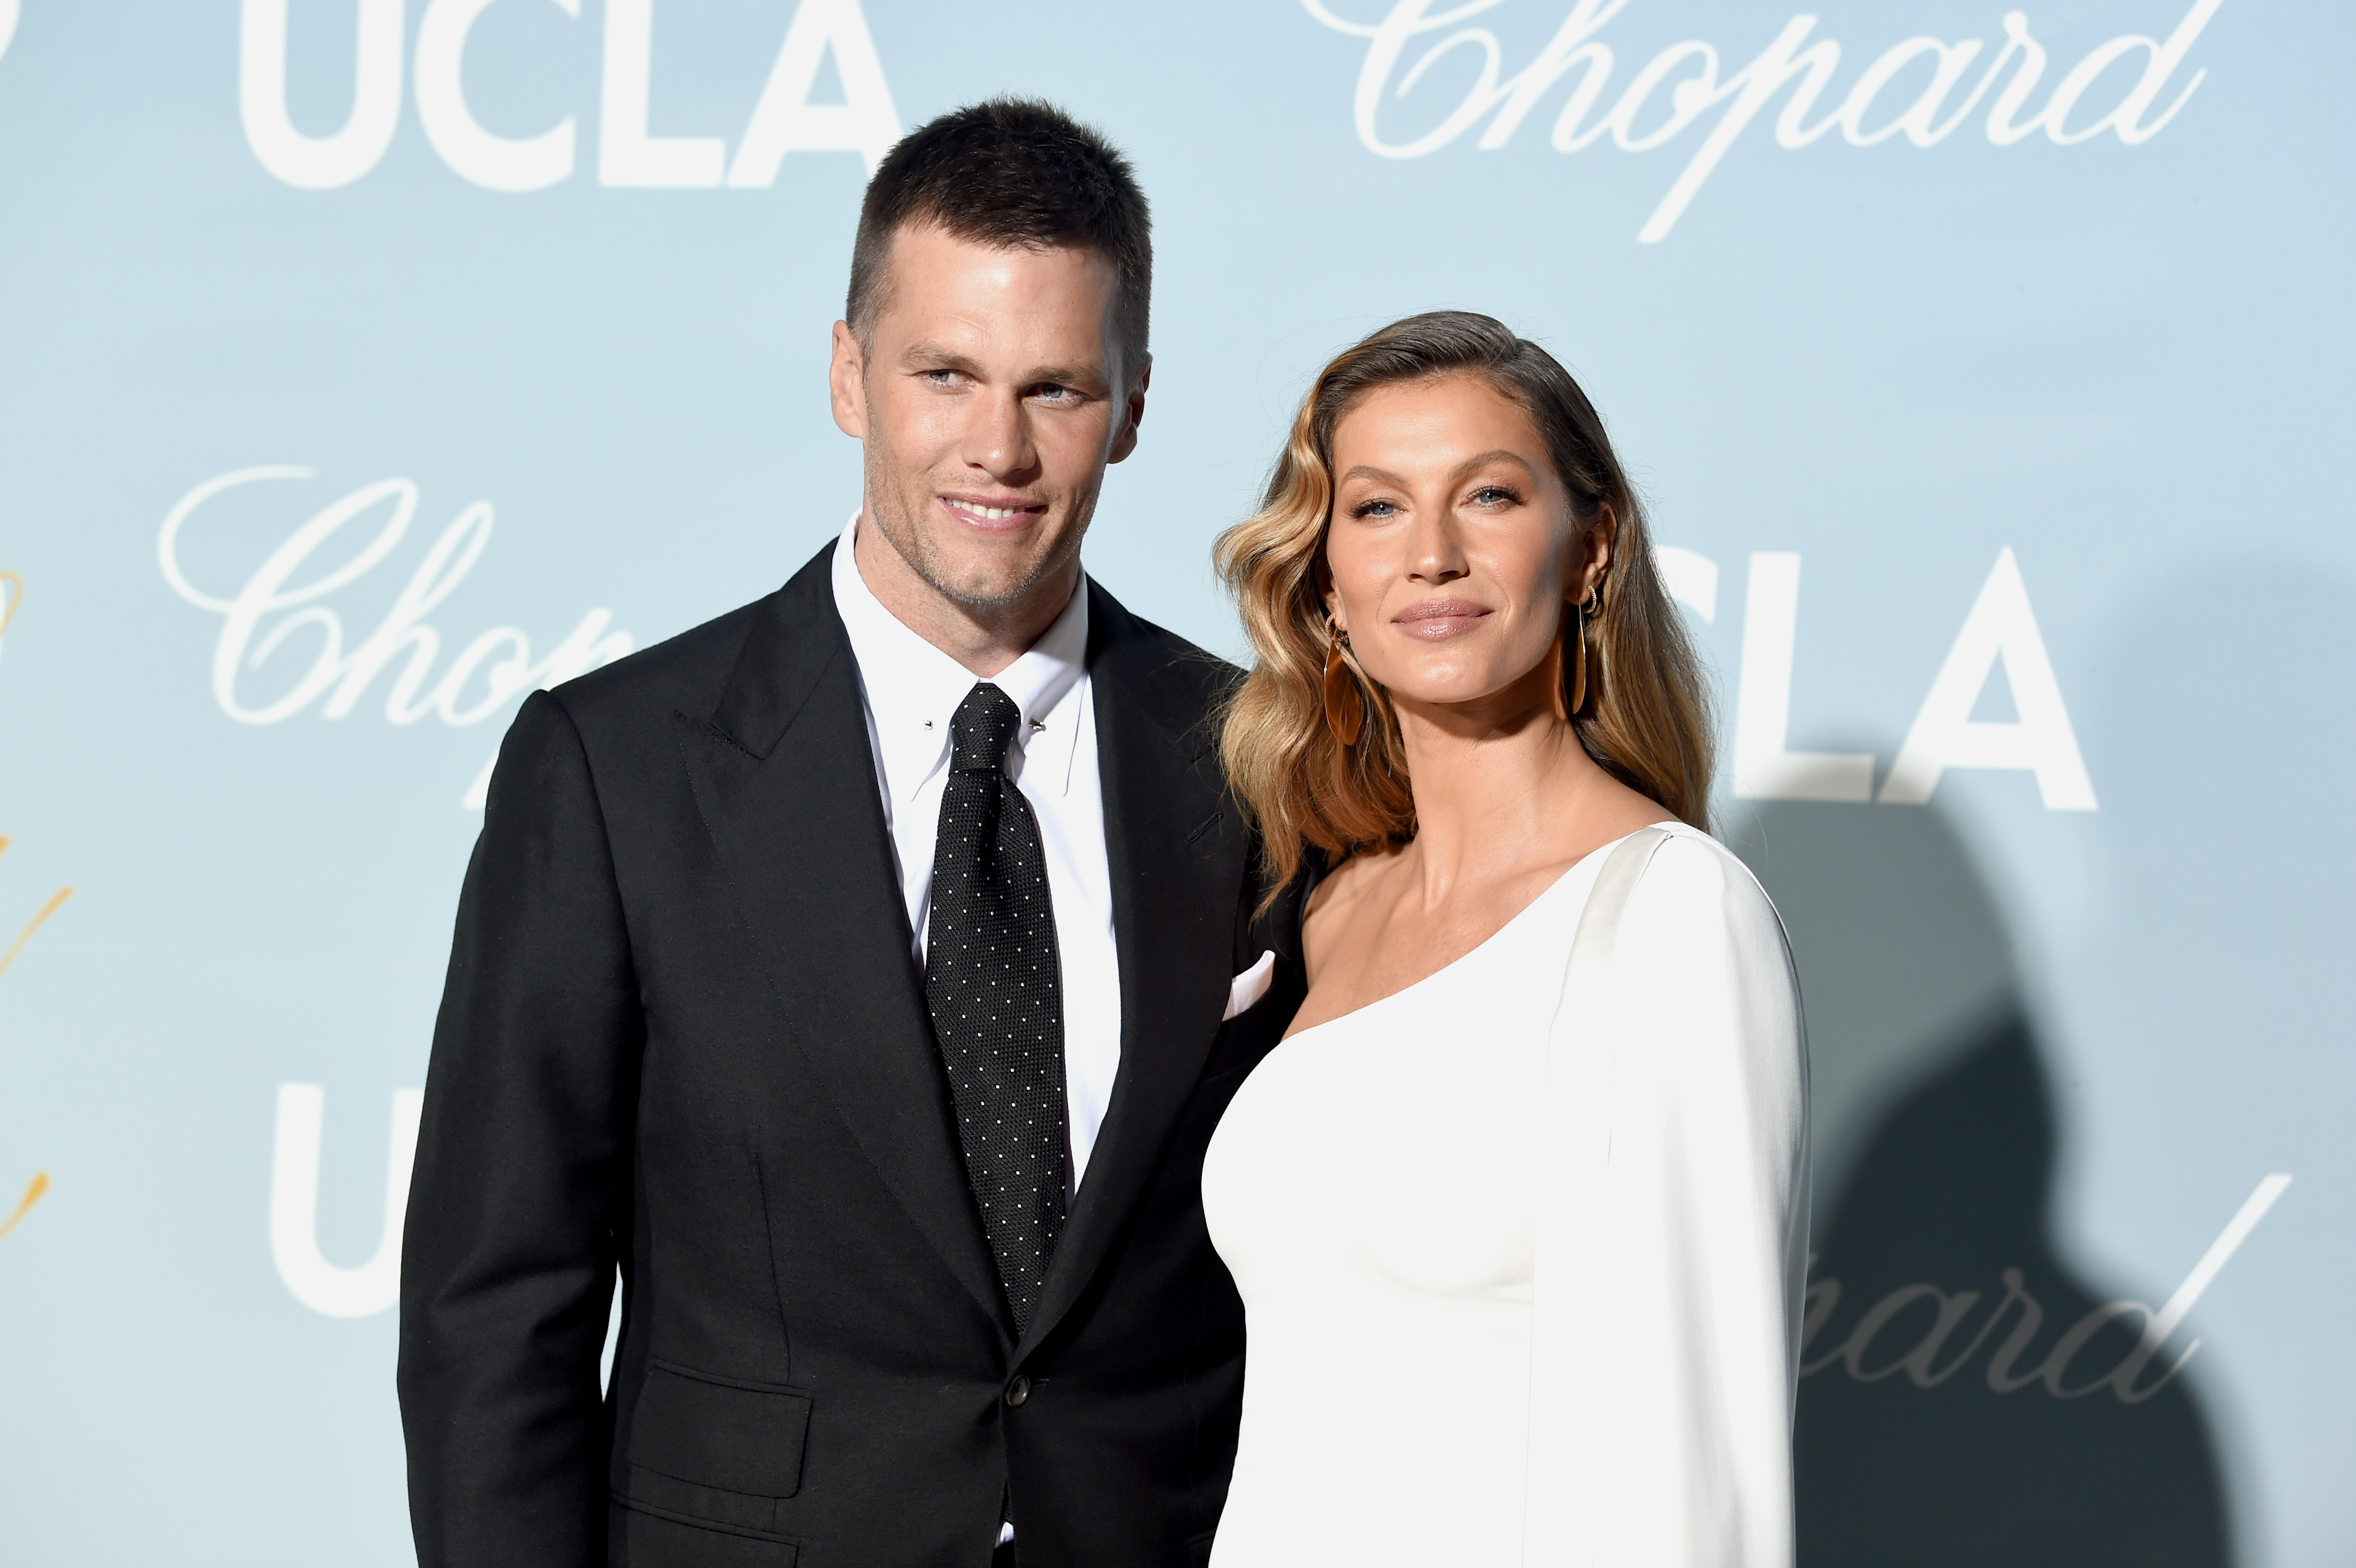 Close-up of Gisele and Tom at a media event